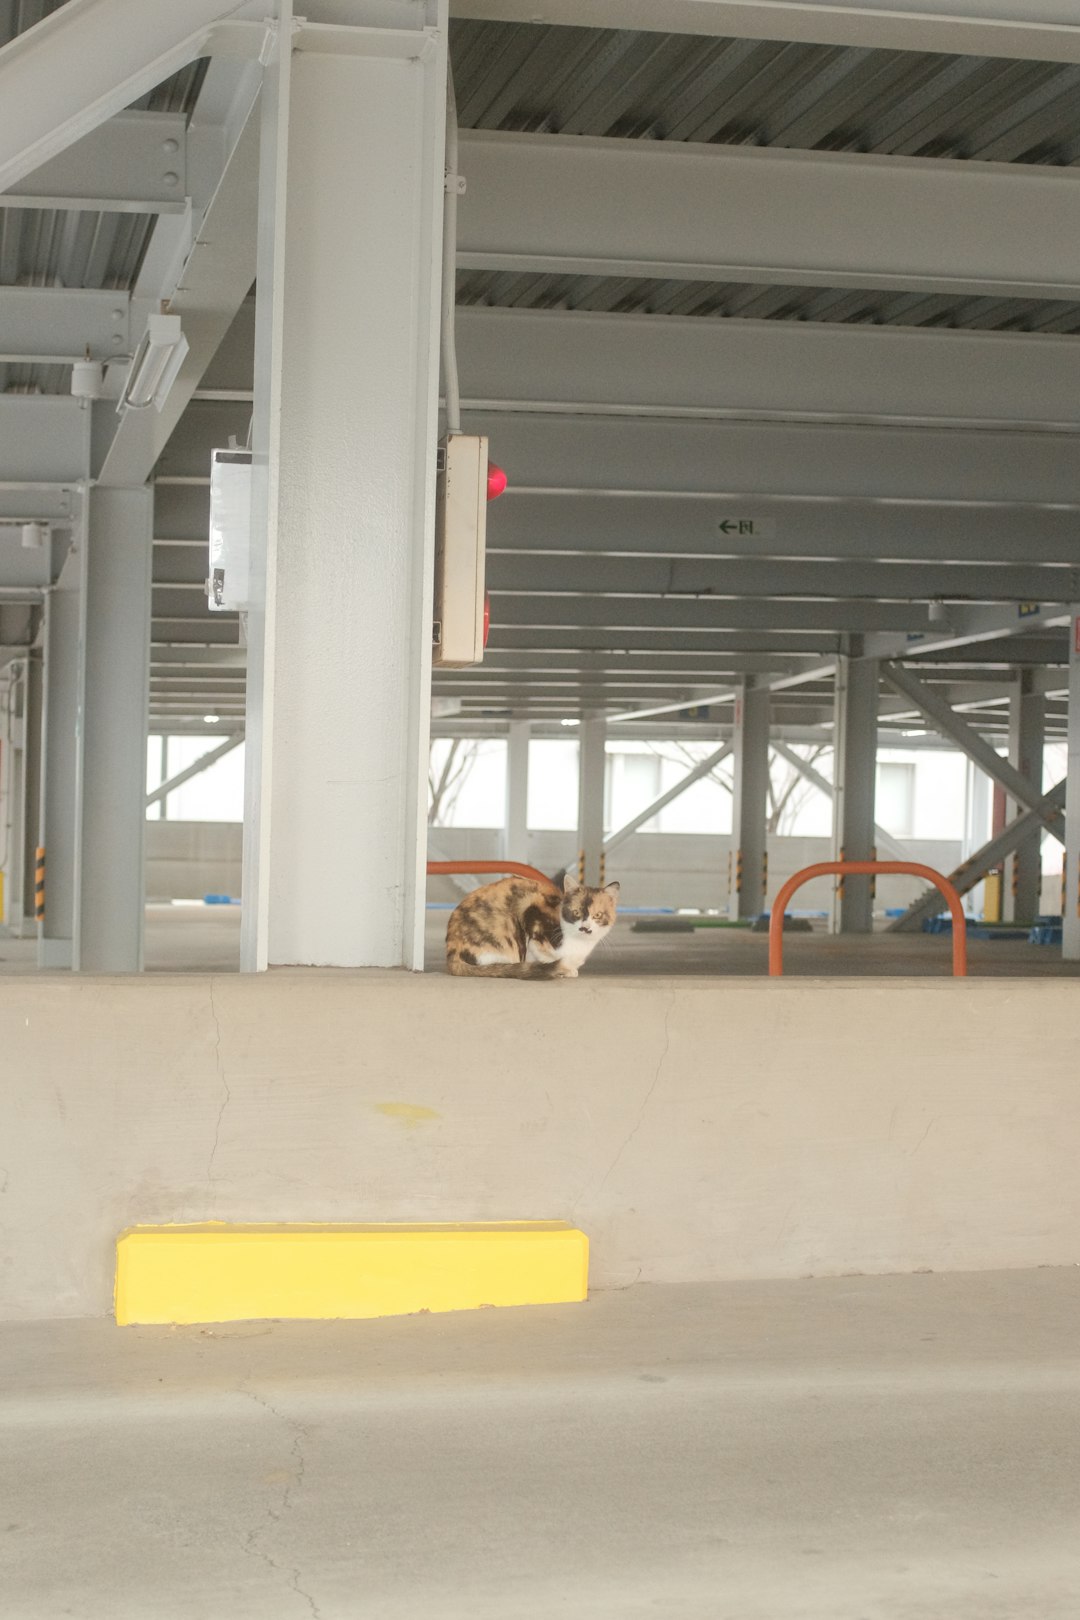 brown and white short coated dog lying on gray concrete floor